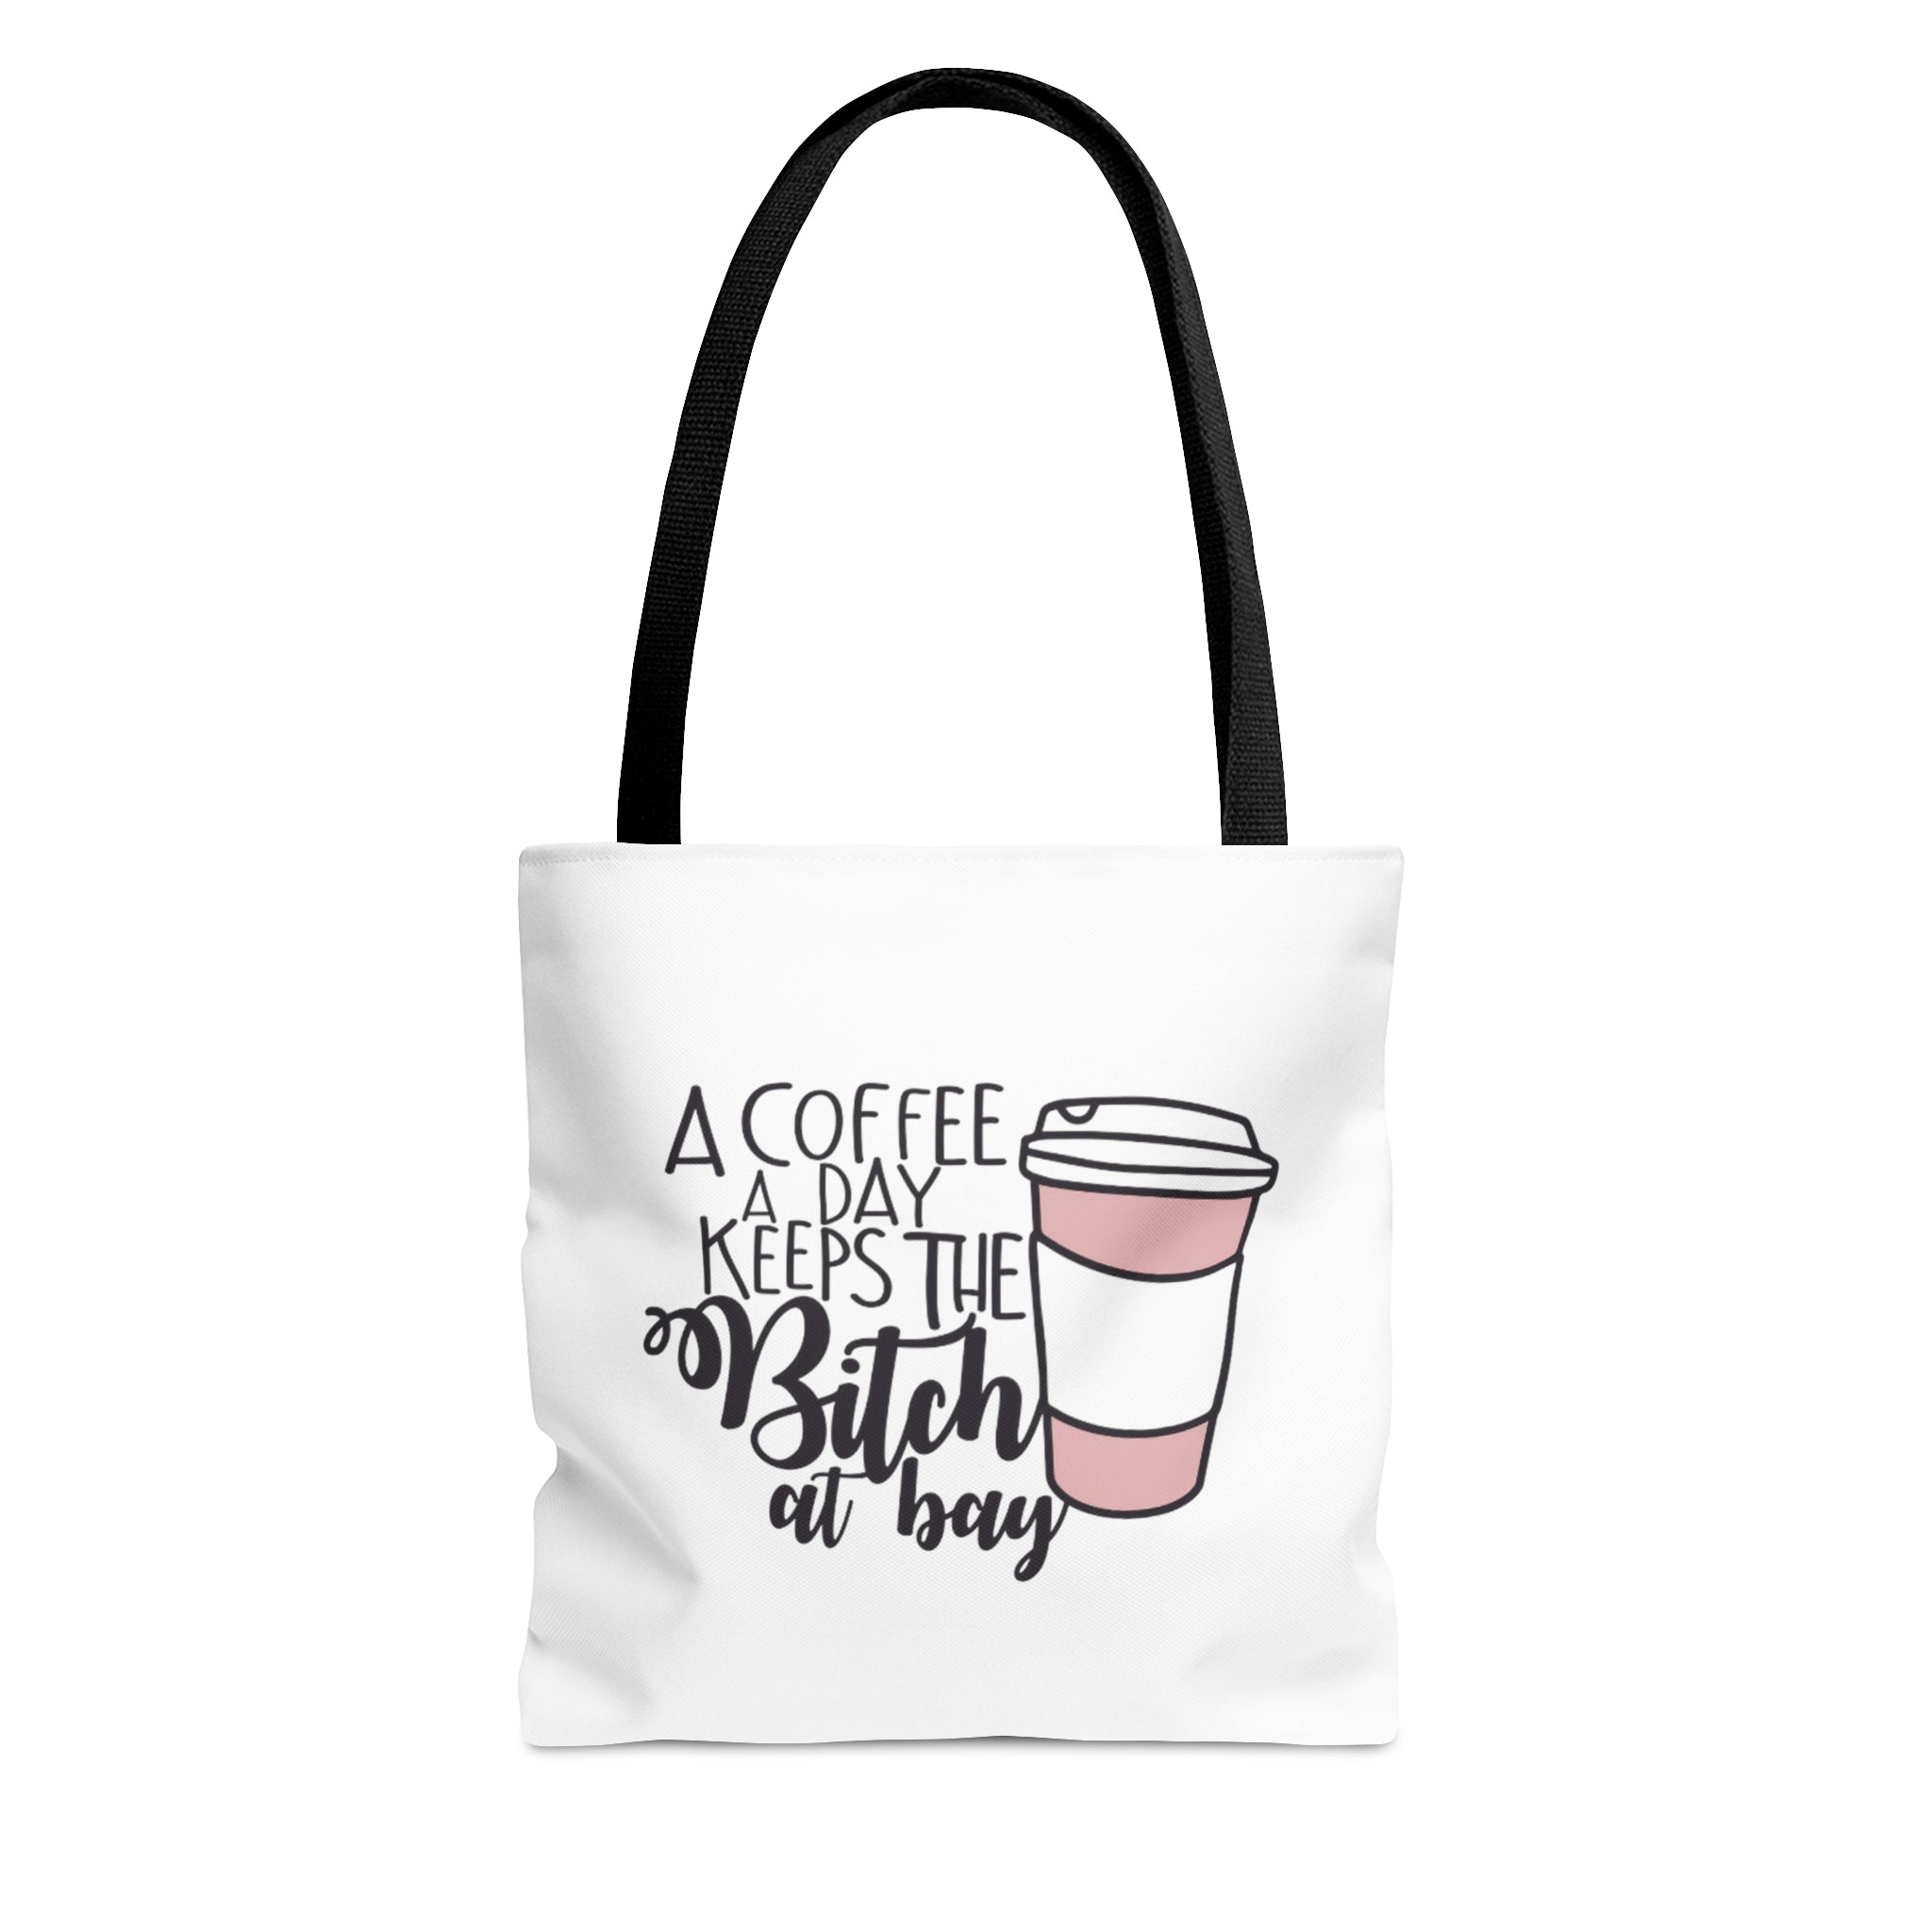 A Coffee a Day Keeps the B!tch at Bay Tote Bag